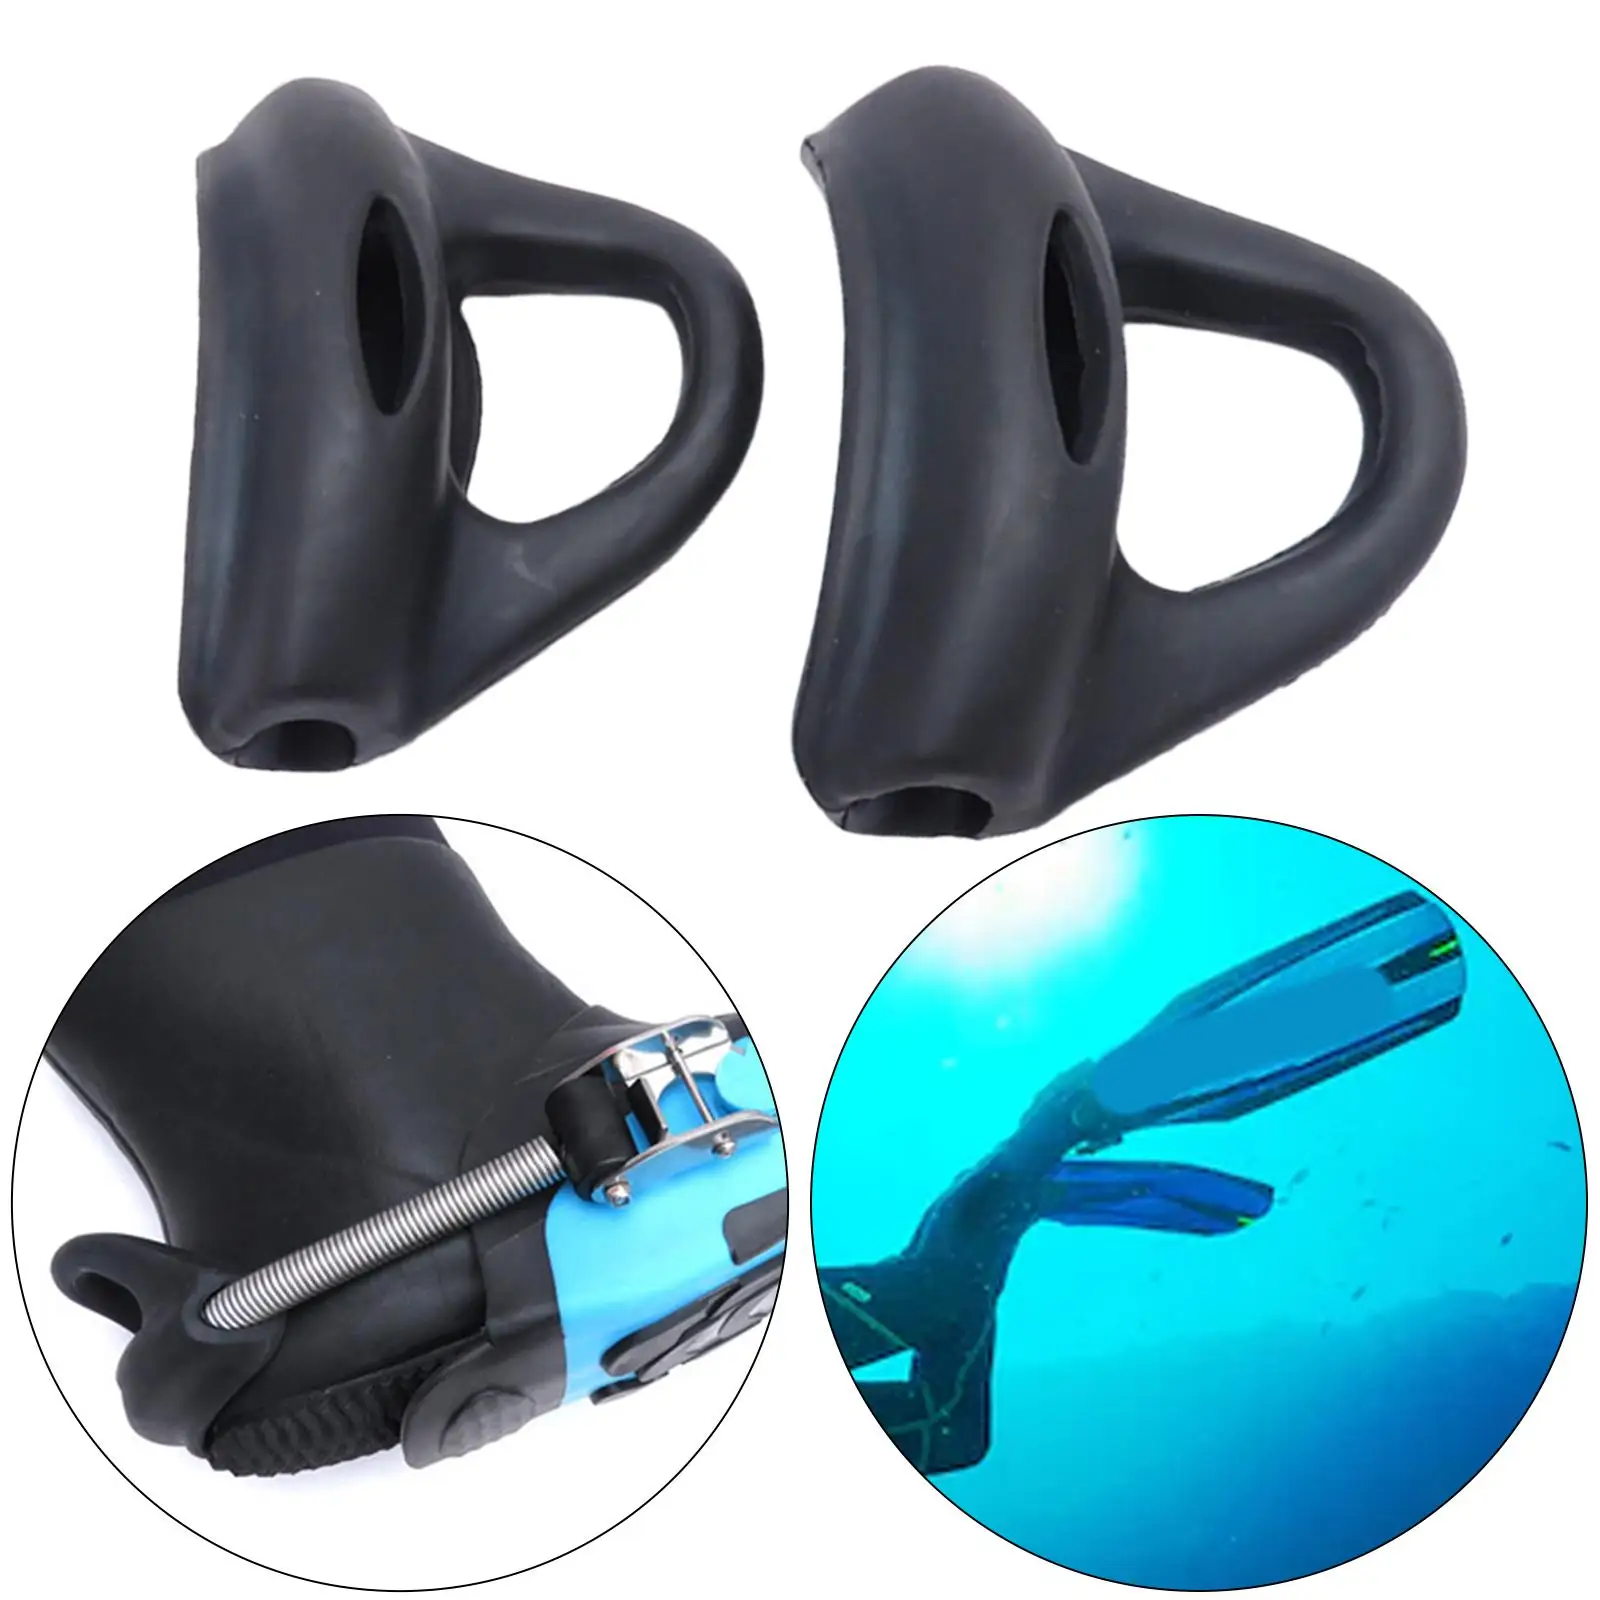 Comfortable Scuba Diving Strap Heel Parts Shoe Lace Heel for Canoeing, Water Sports